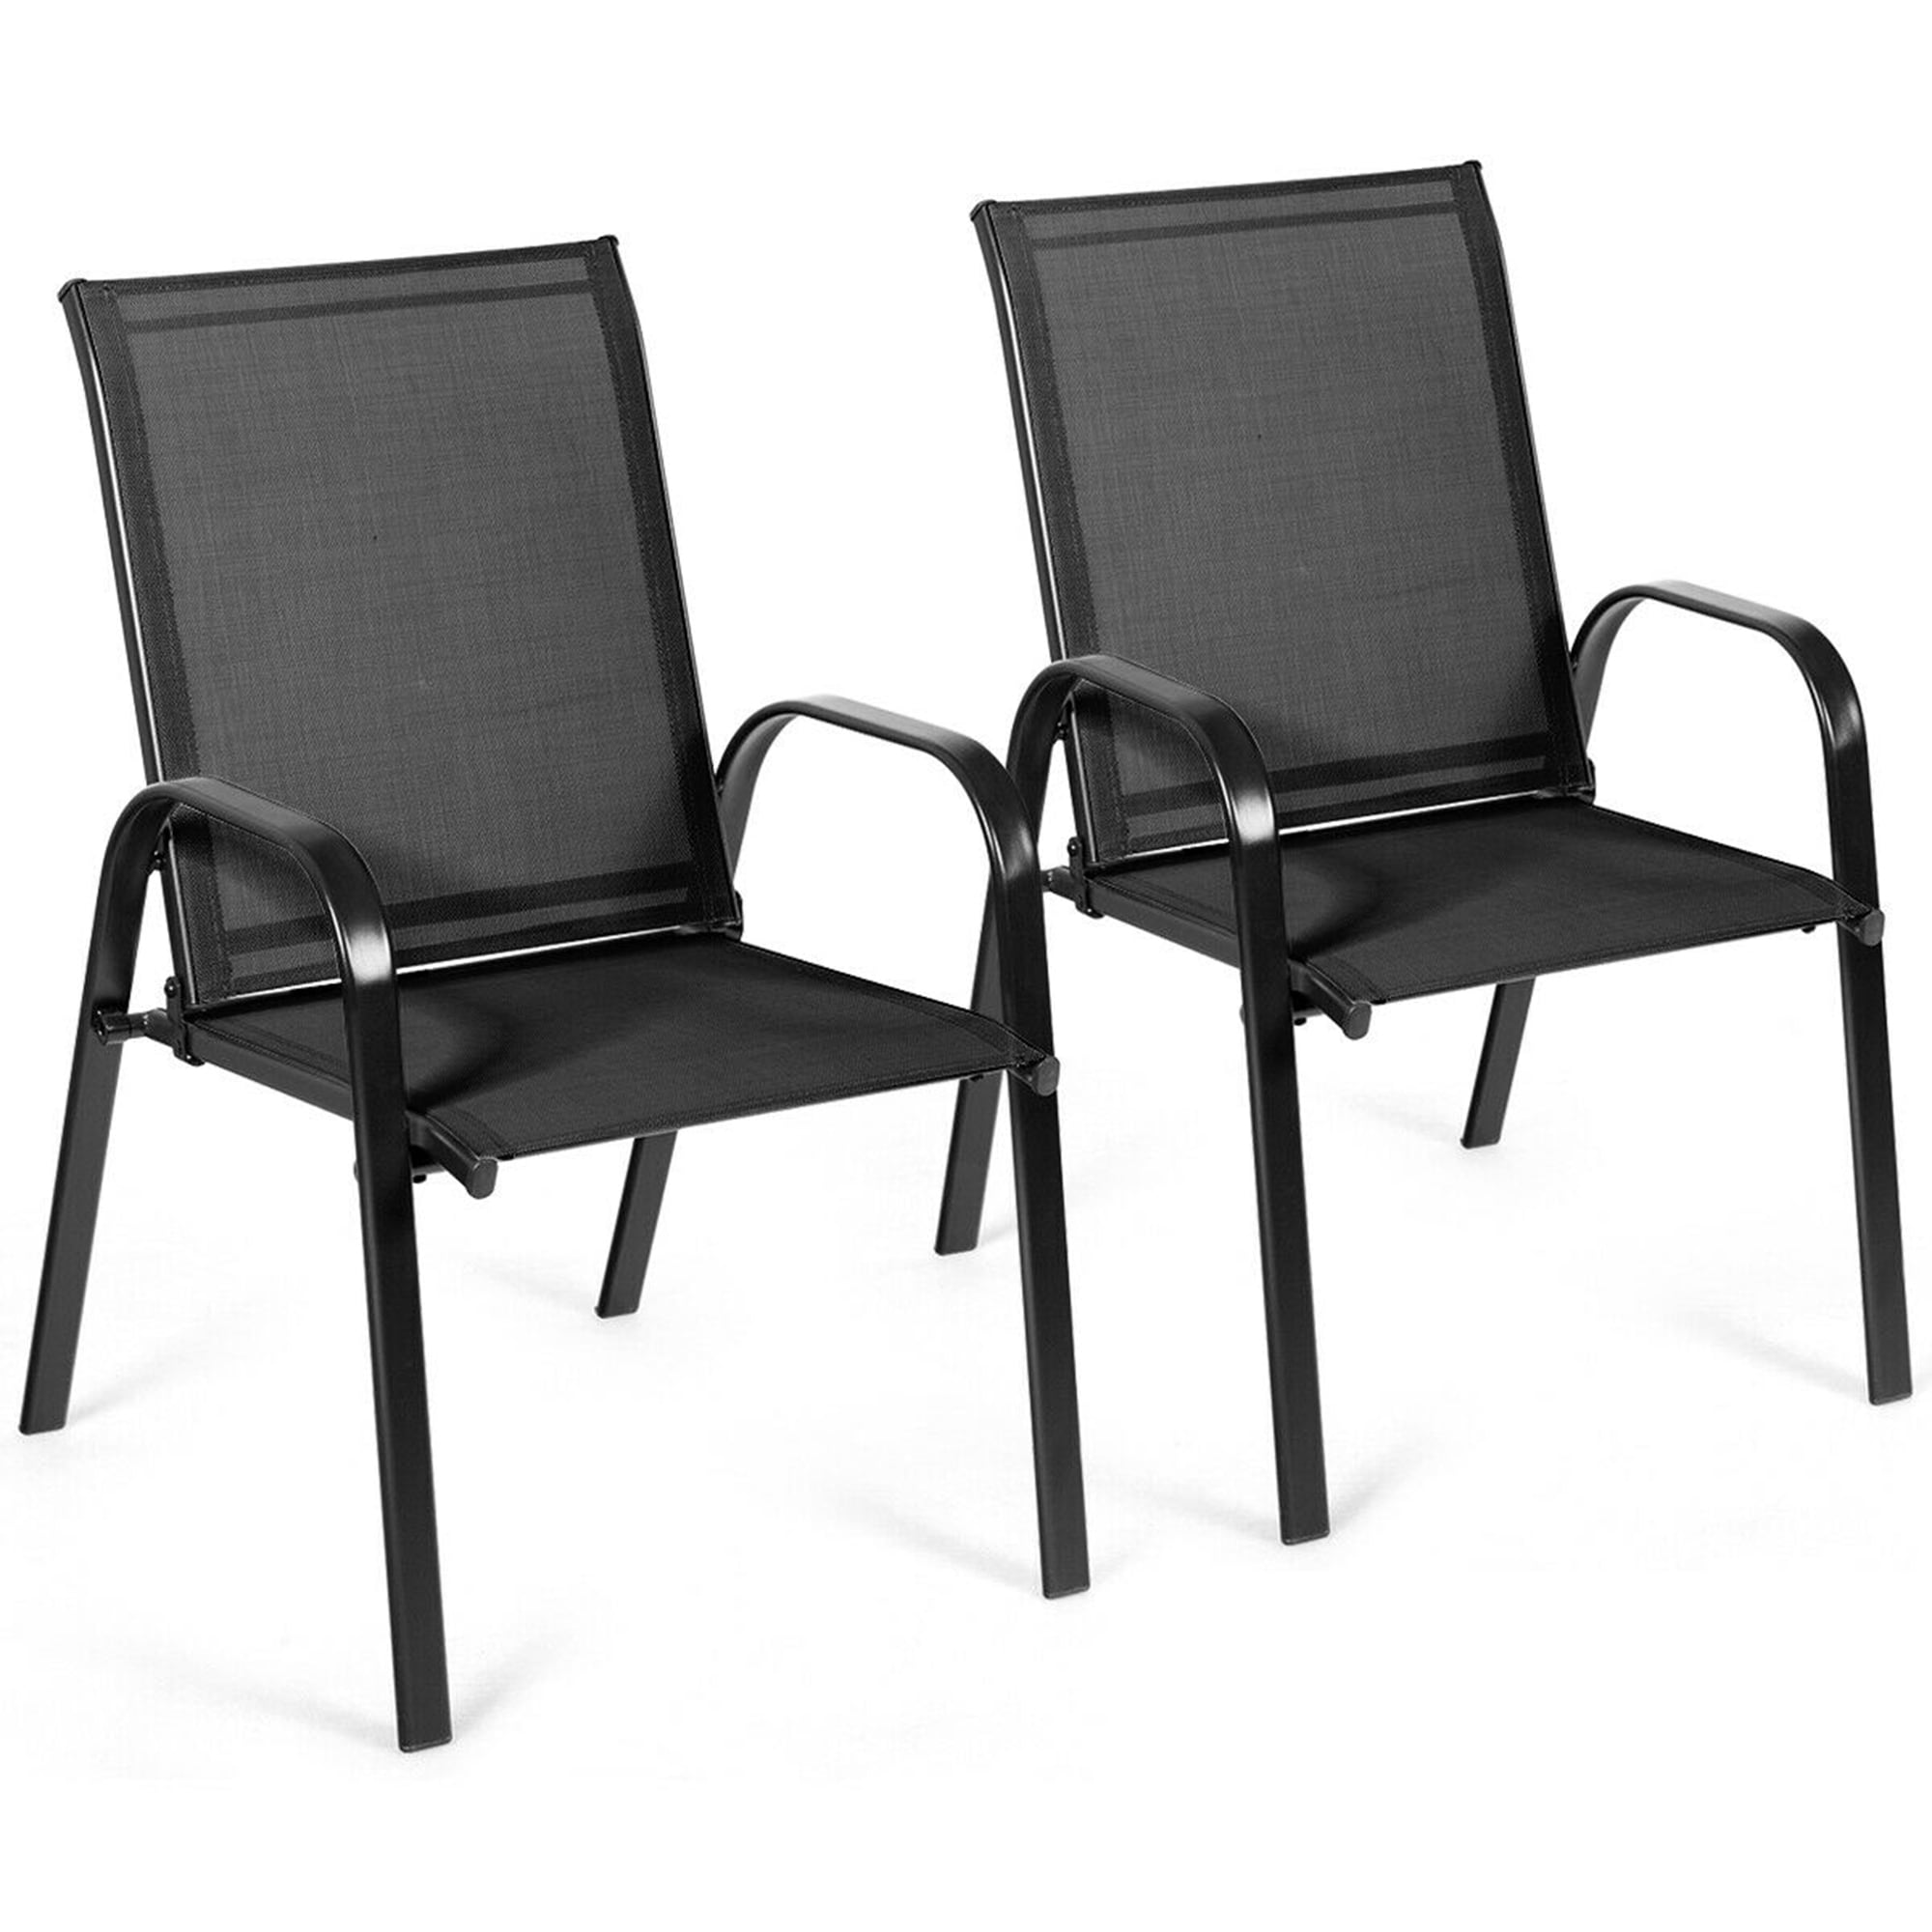 Gymax Set of 2 Patio Chairs Dining Chairs w/ Steel Frame Yard Outdoor Black